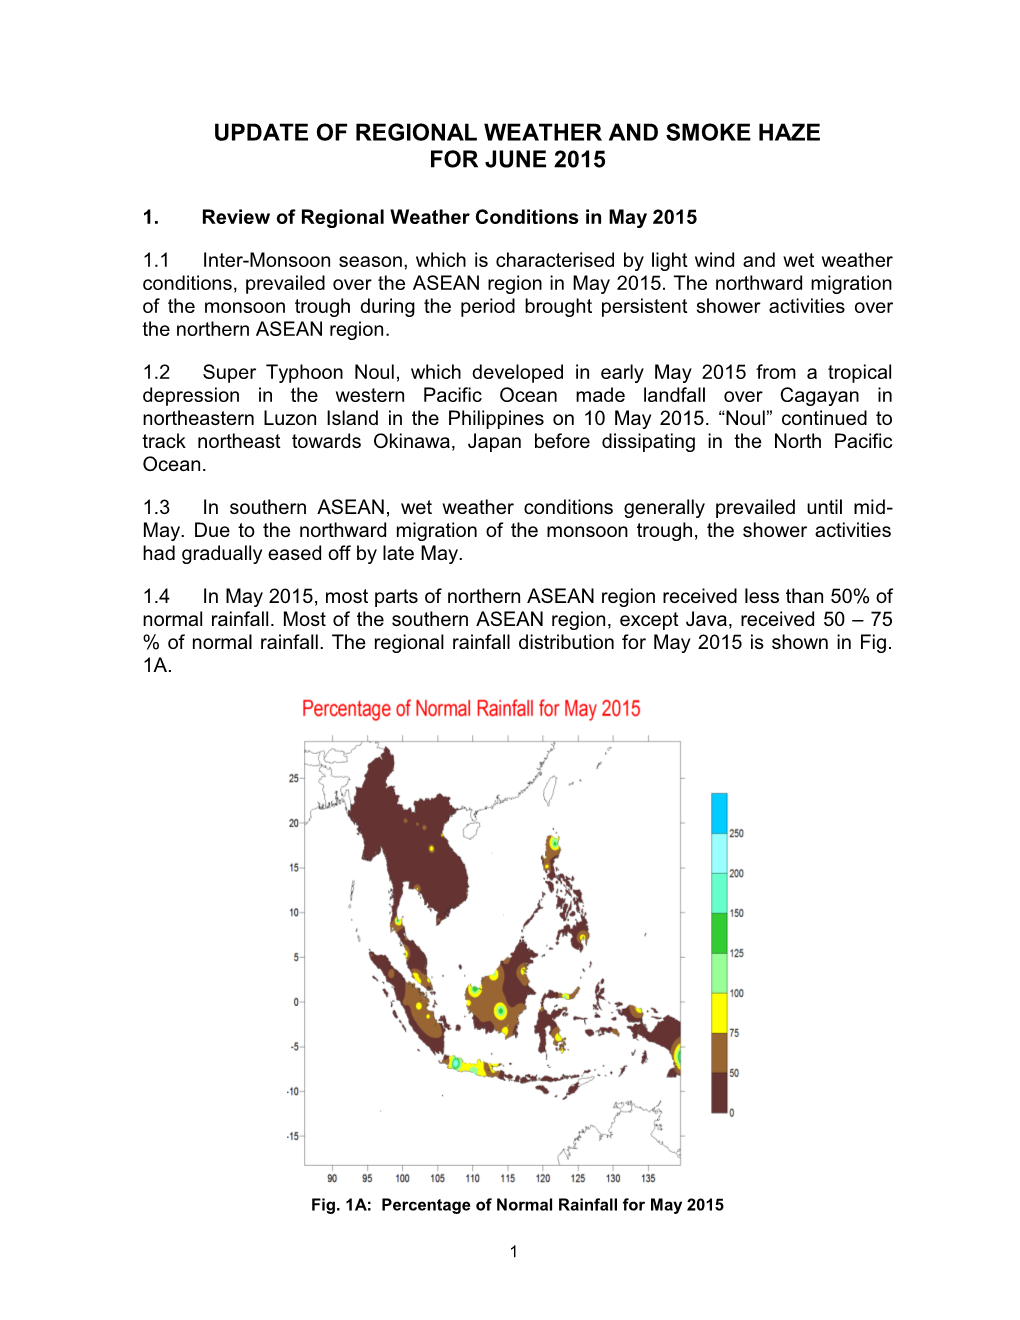 Update of Regional Weather and Smoke Haze for June 2015